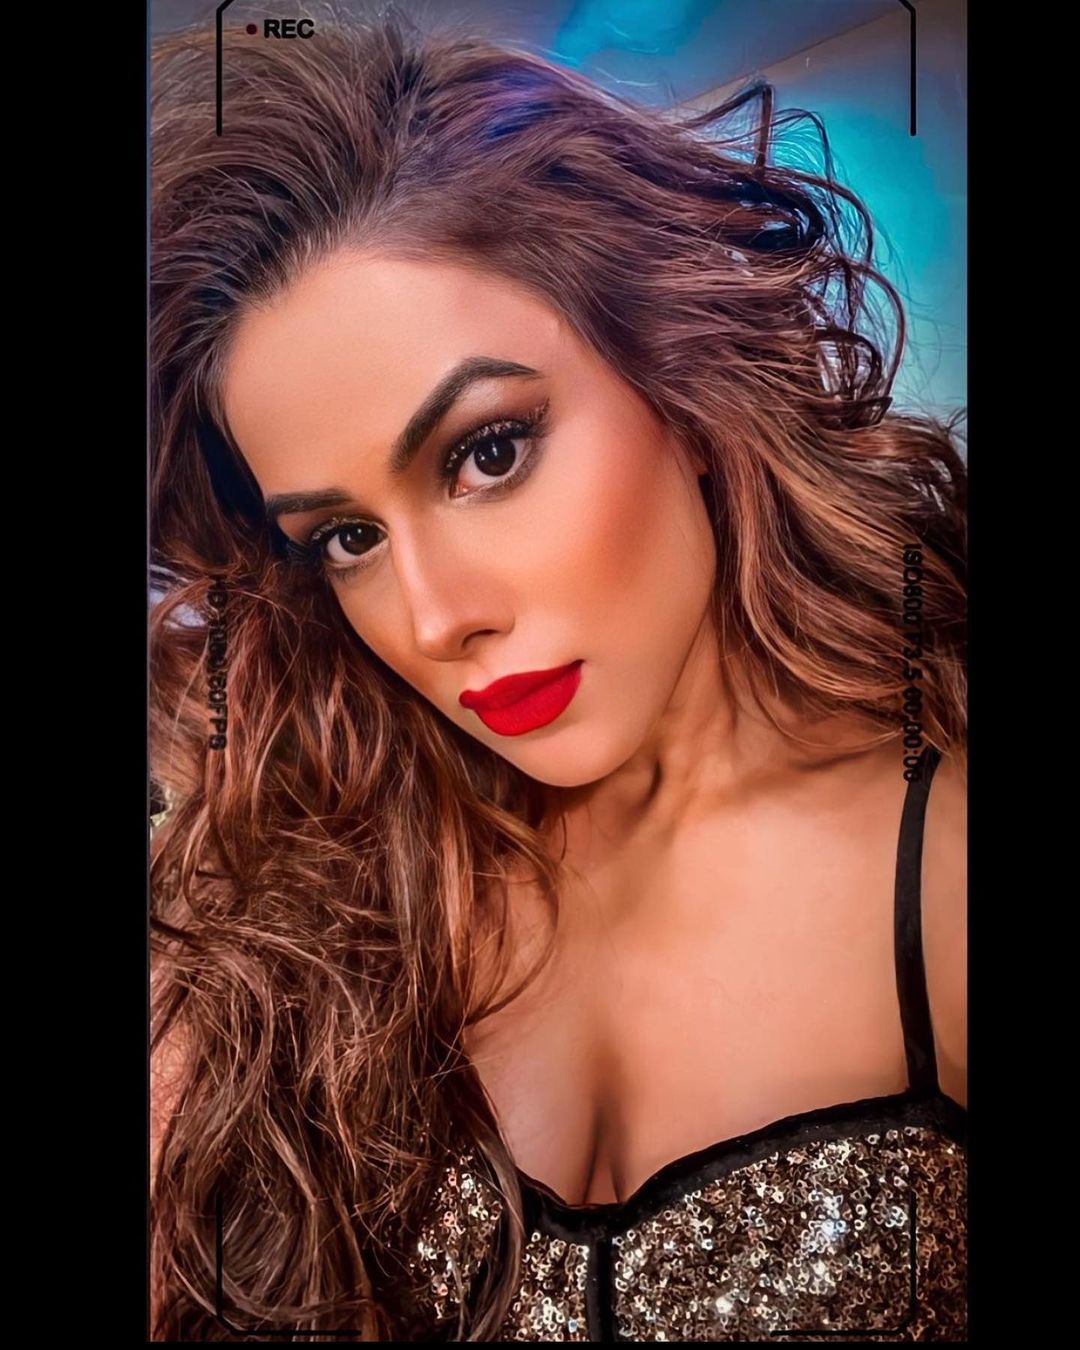 Nia Sharma looks fabulous in the cleavage-baring dress and bold red lips